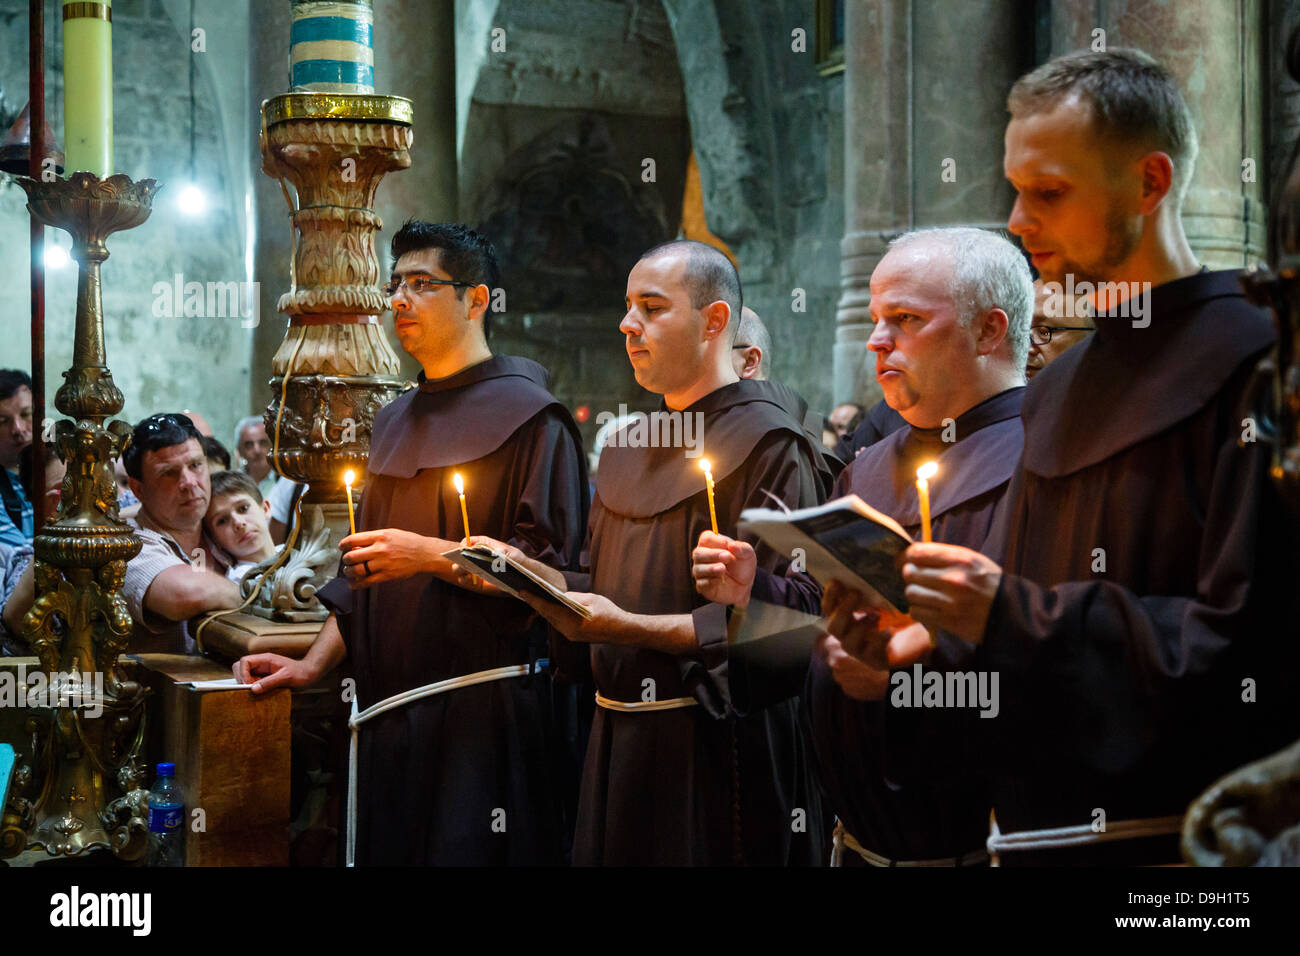 Franciscan monks at the church of the Holy Sepulchre in the old city, Jerusalem, Israel. Stock Photo